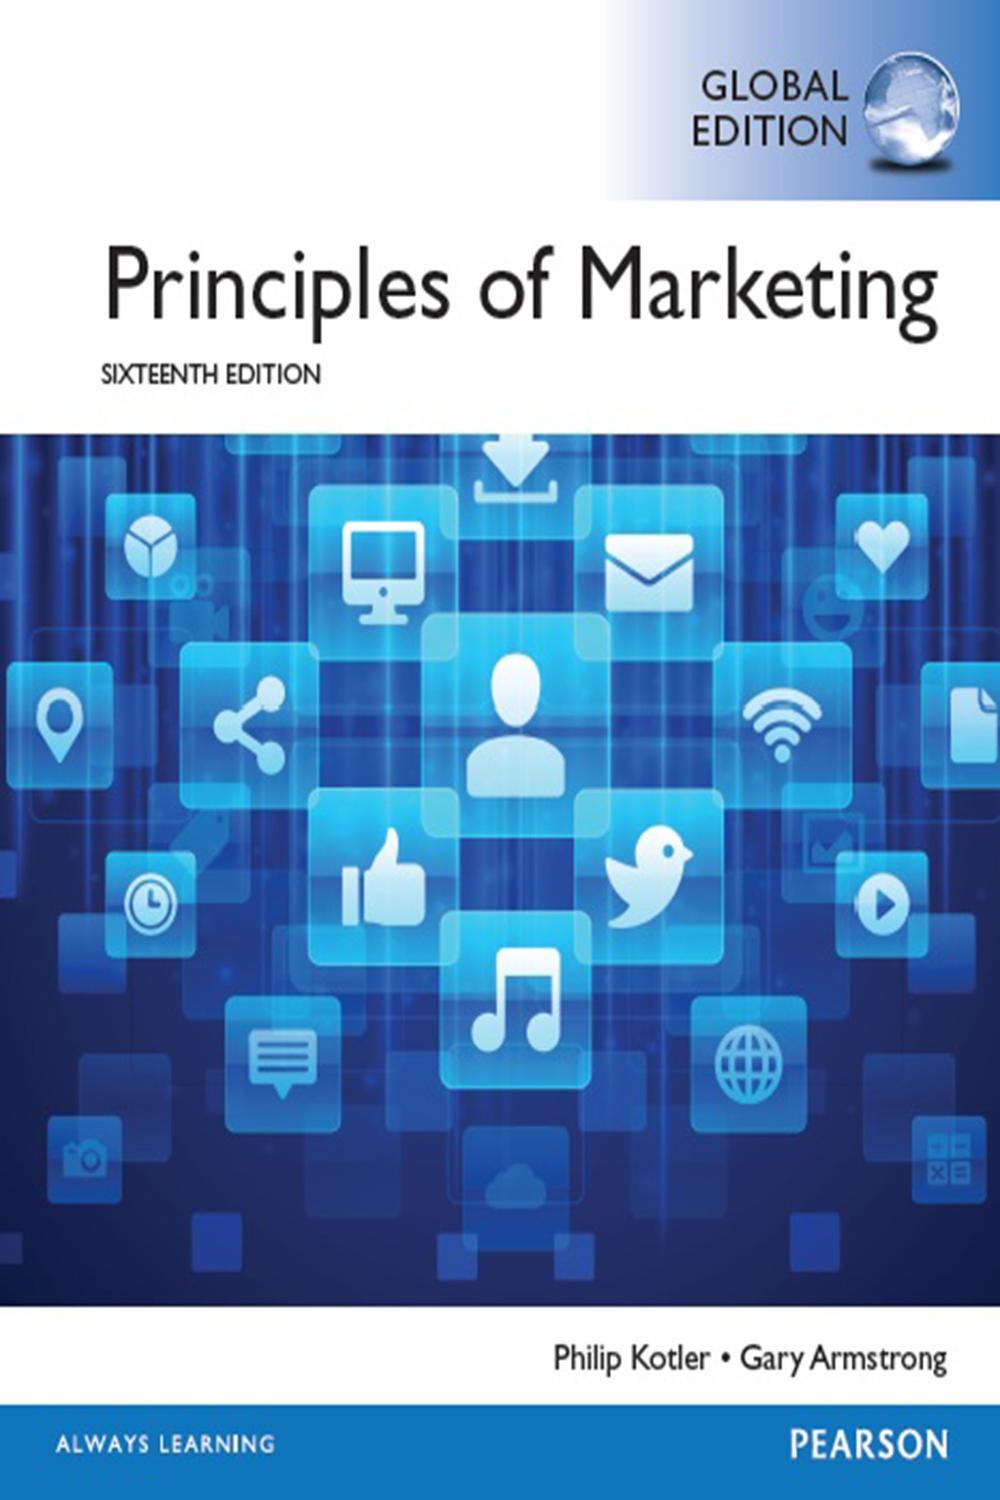 PDF] Principles of Marketing, Global Edition by Philip Kotler 